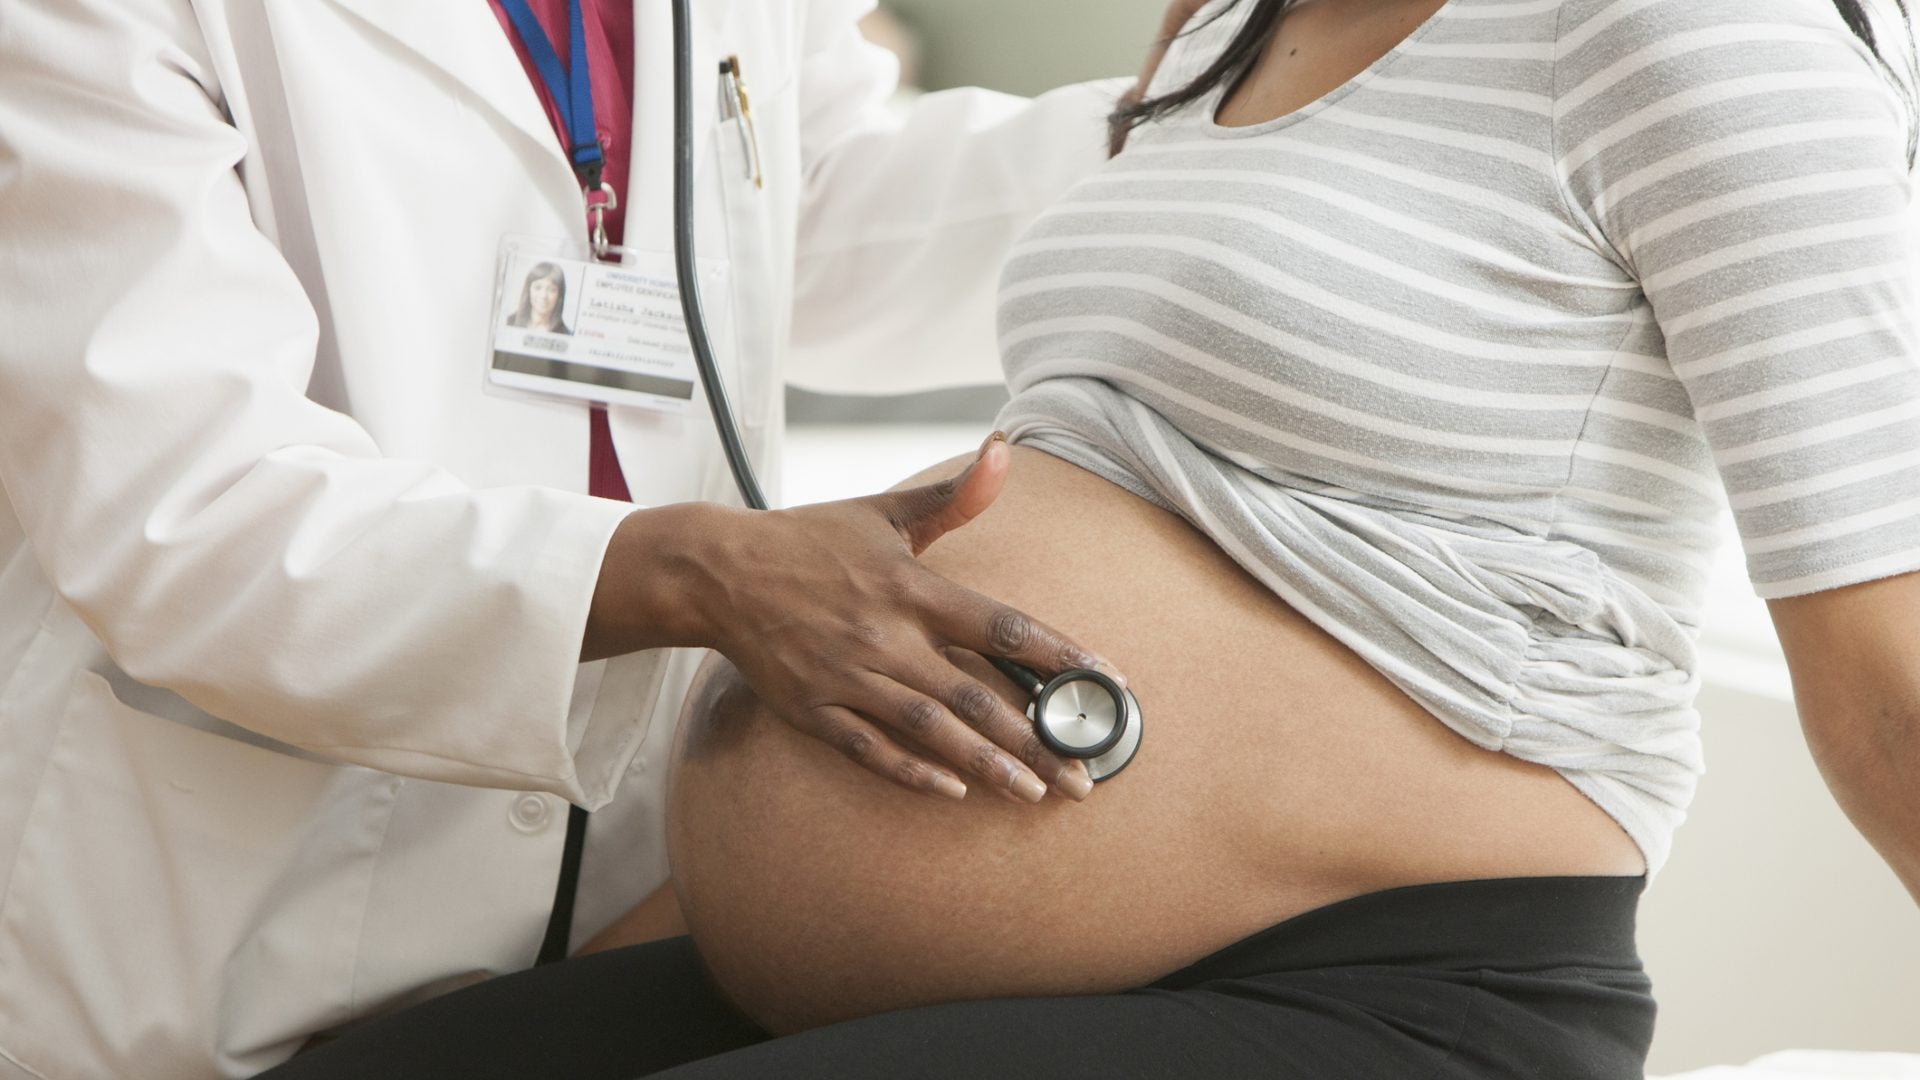 Black Maternal Health Matters: What To Know Before You Give Birth